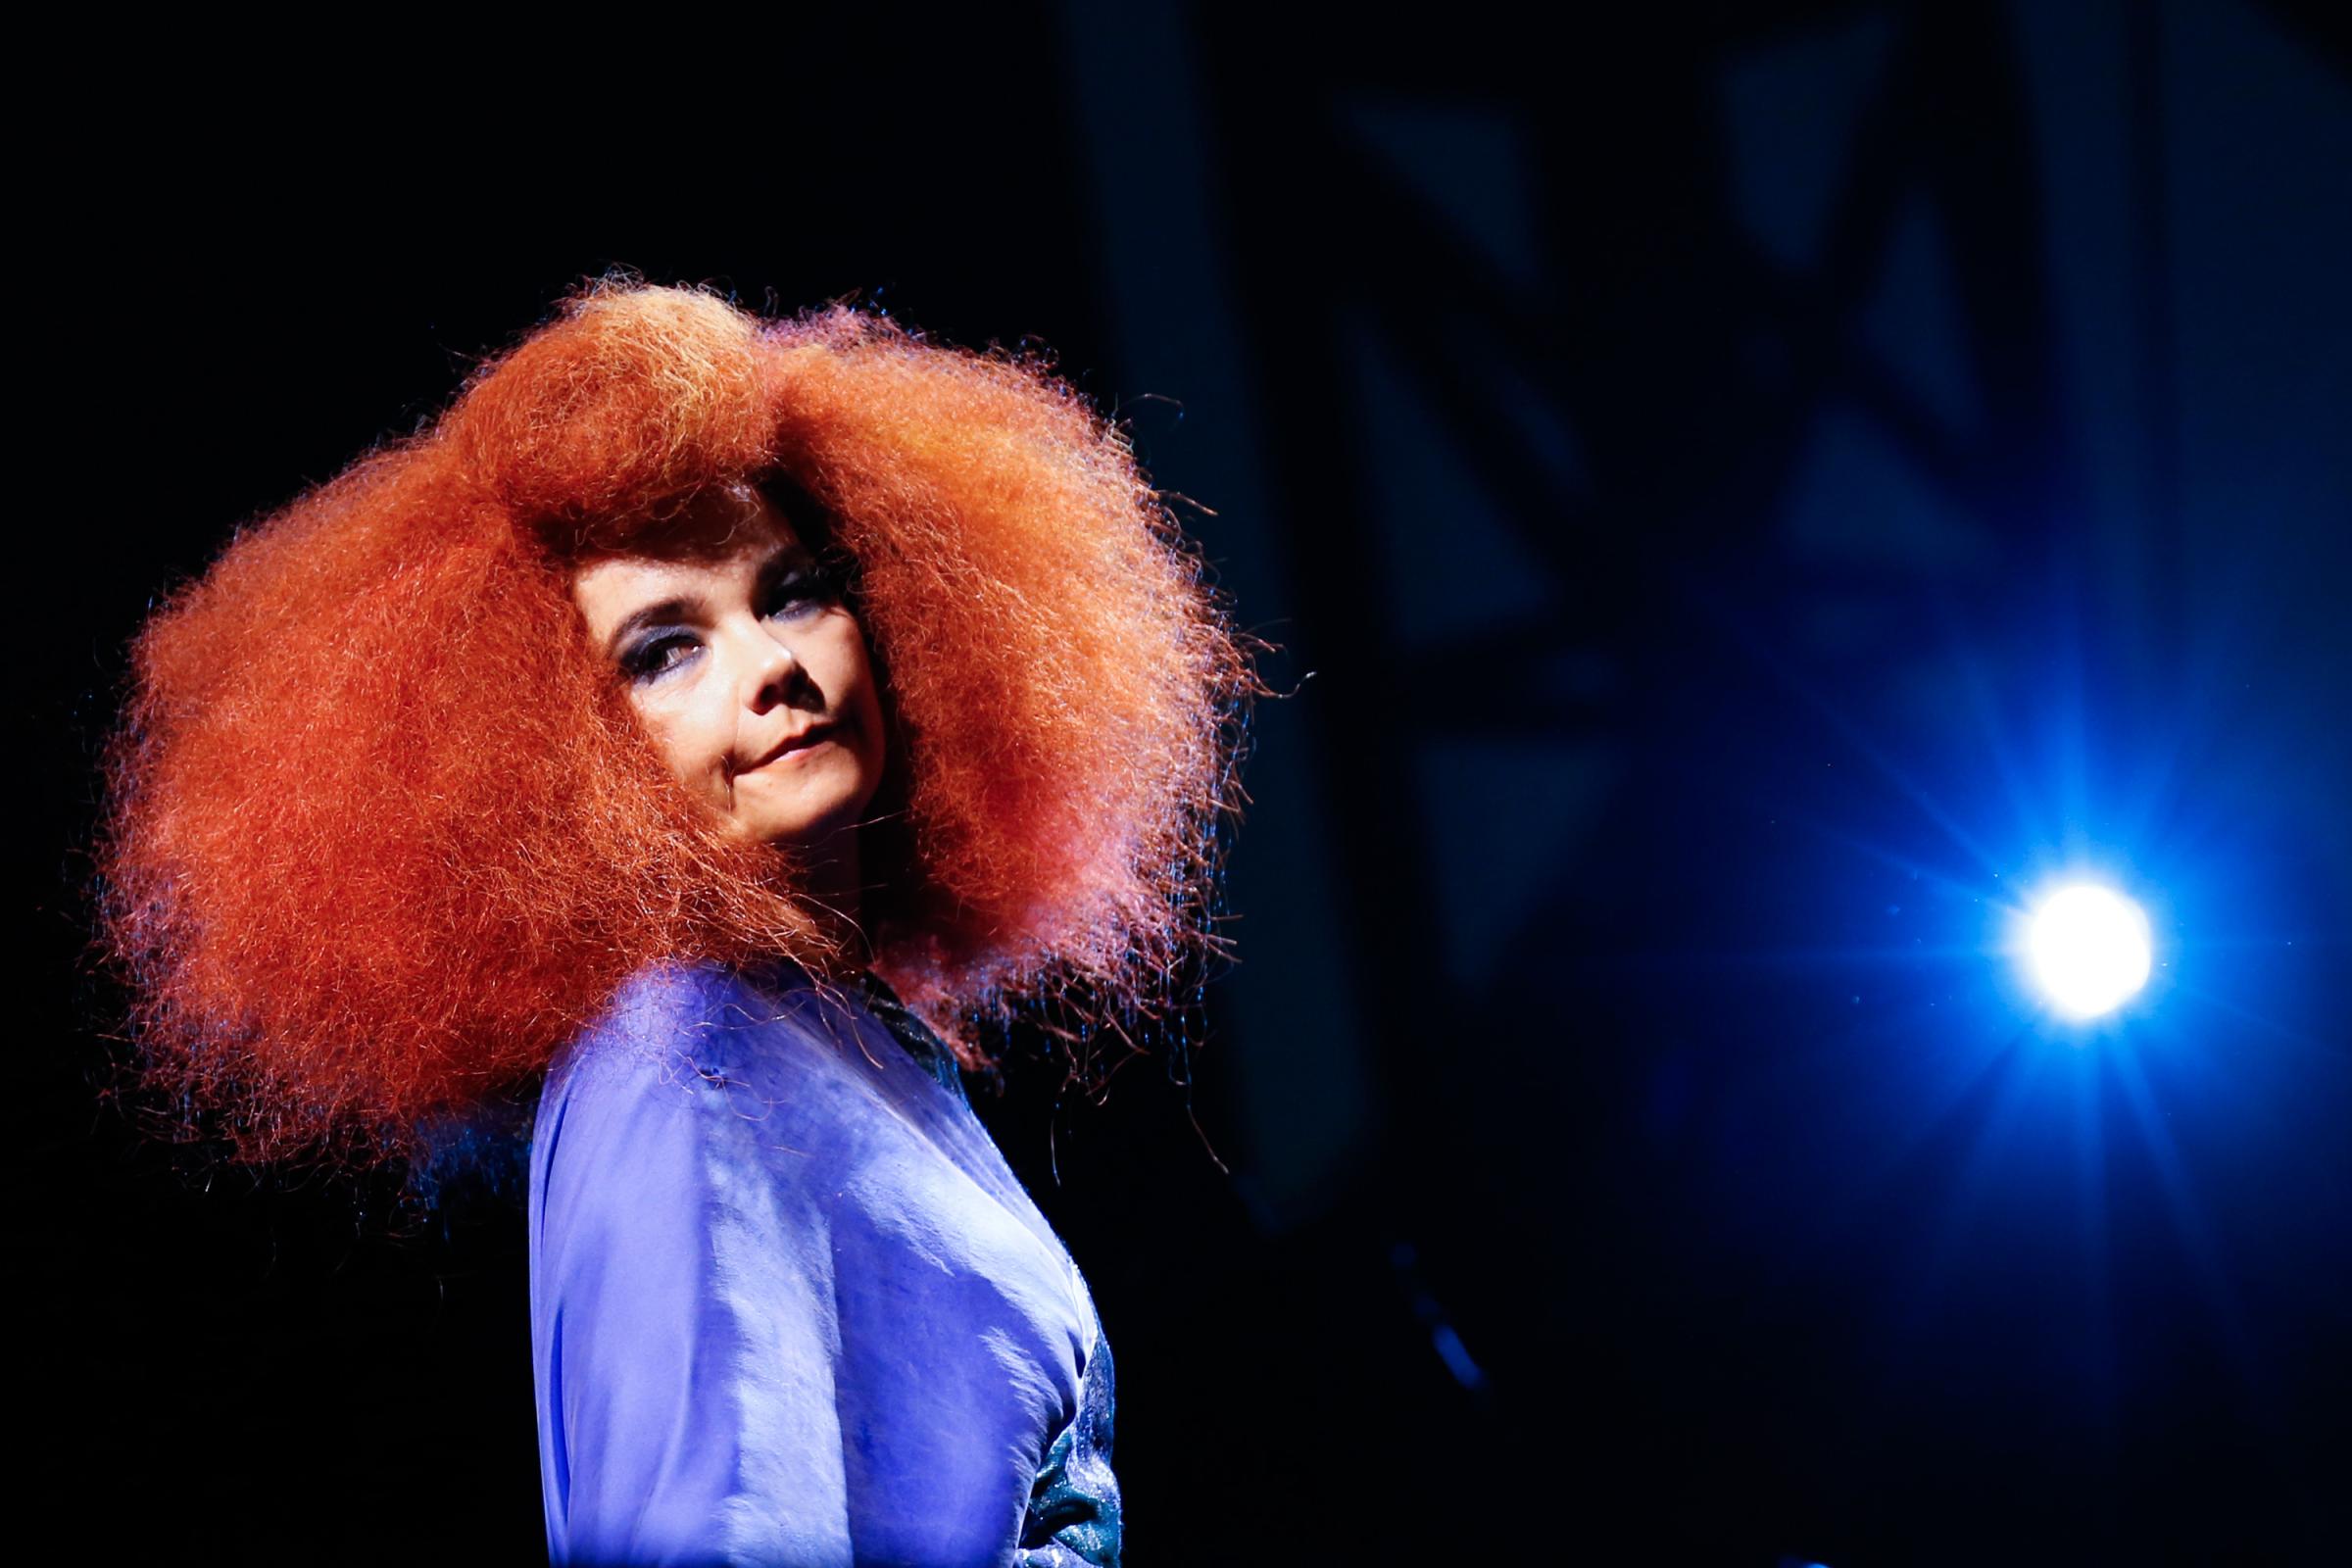 Björk performs in Ottawa, Canada on July 13, 2013.